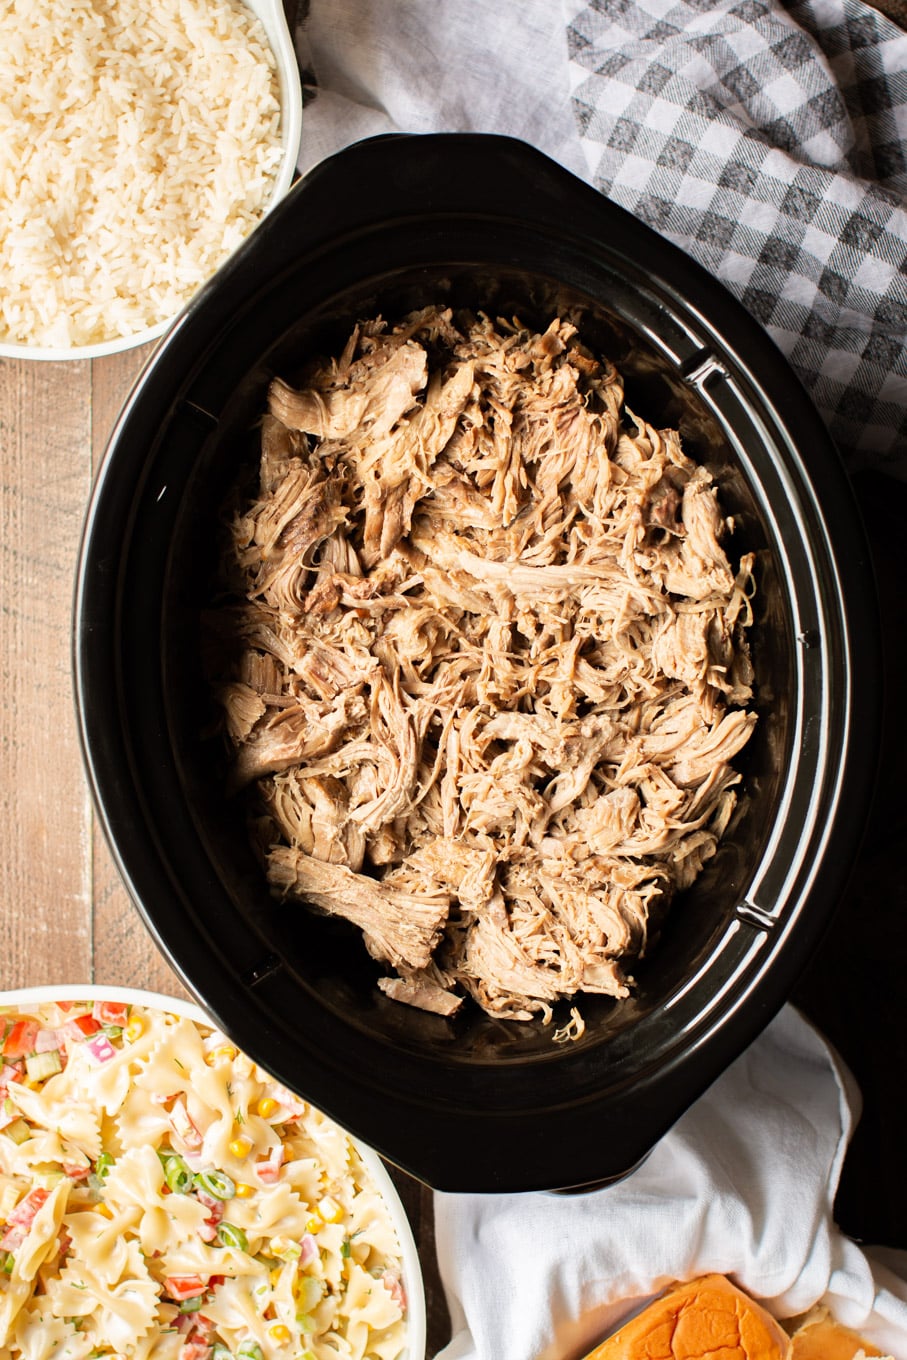 Shredded Hawaiian style pork in a slow cooker with pasta salad and rice on the side.